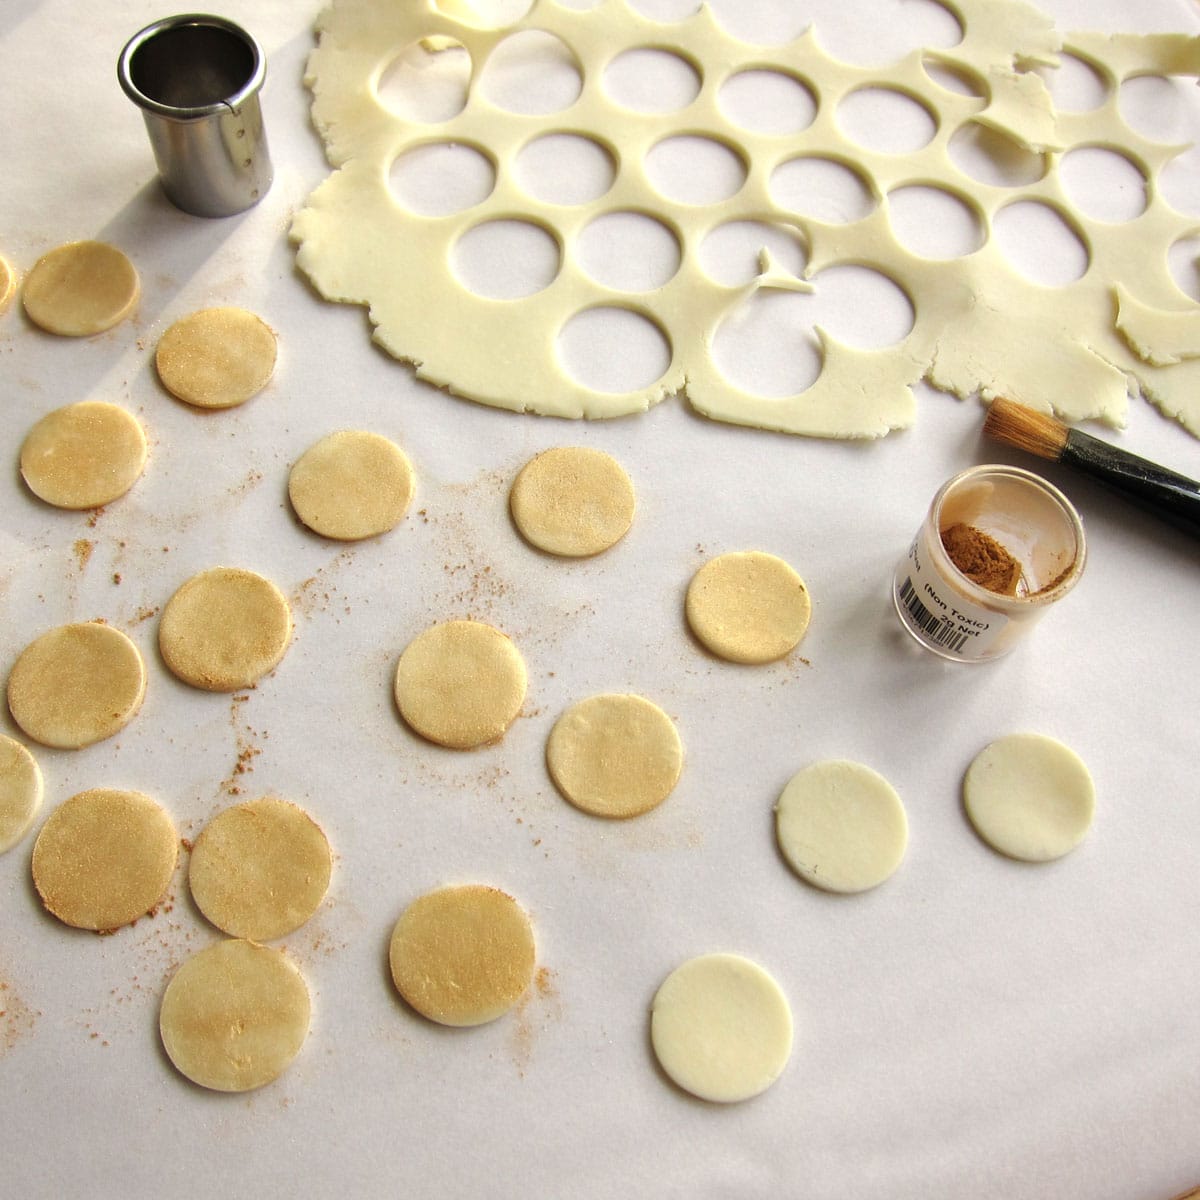 making gold coins out of white modeling chocolate and gold luster dust.